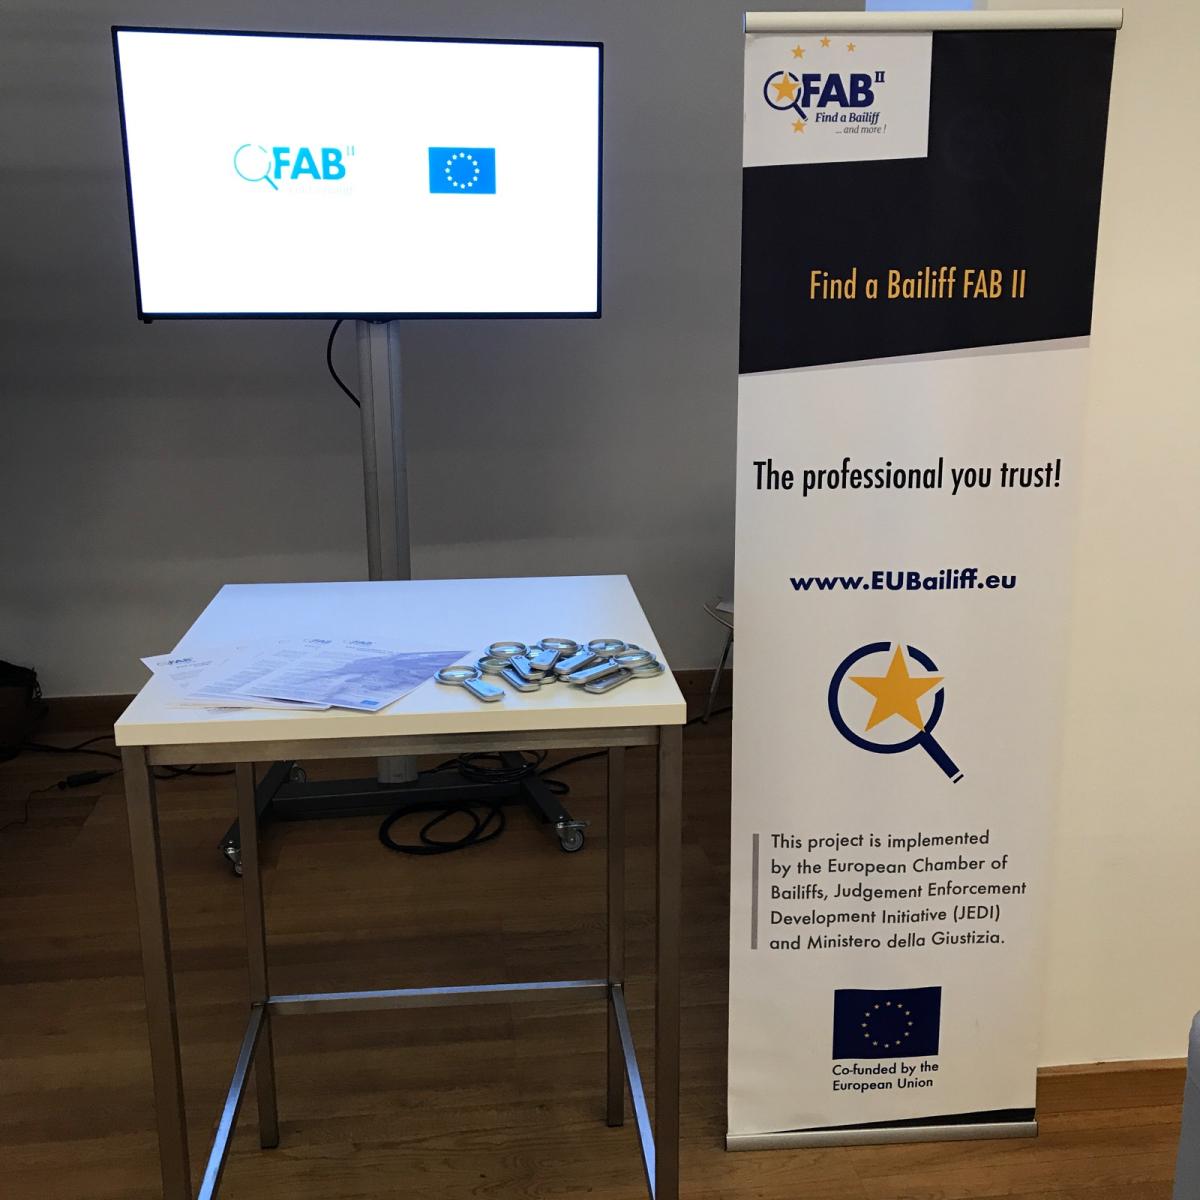 The CEHJ is in Vienna showcasing Find a Bailiff II at the e-Justice conference......come by! @EU2018AT #EuBailiff